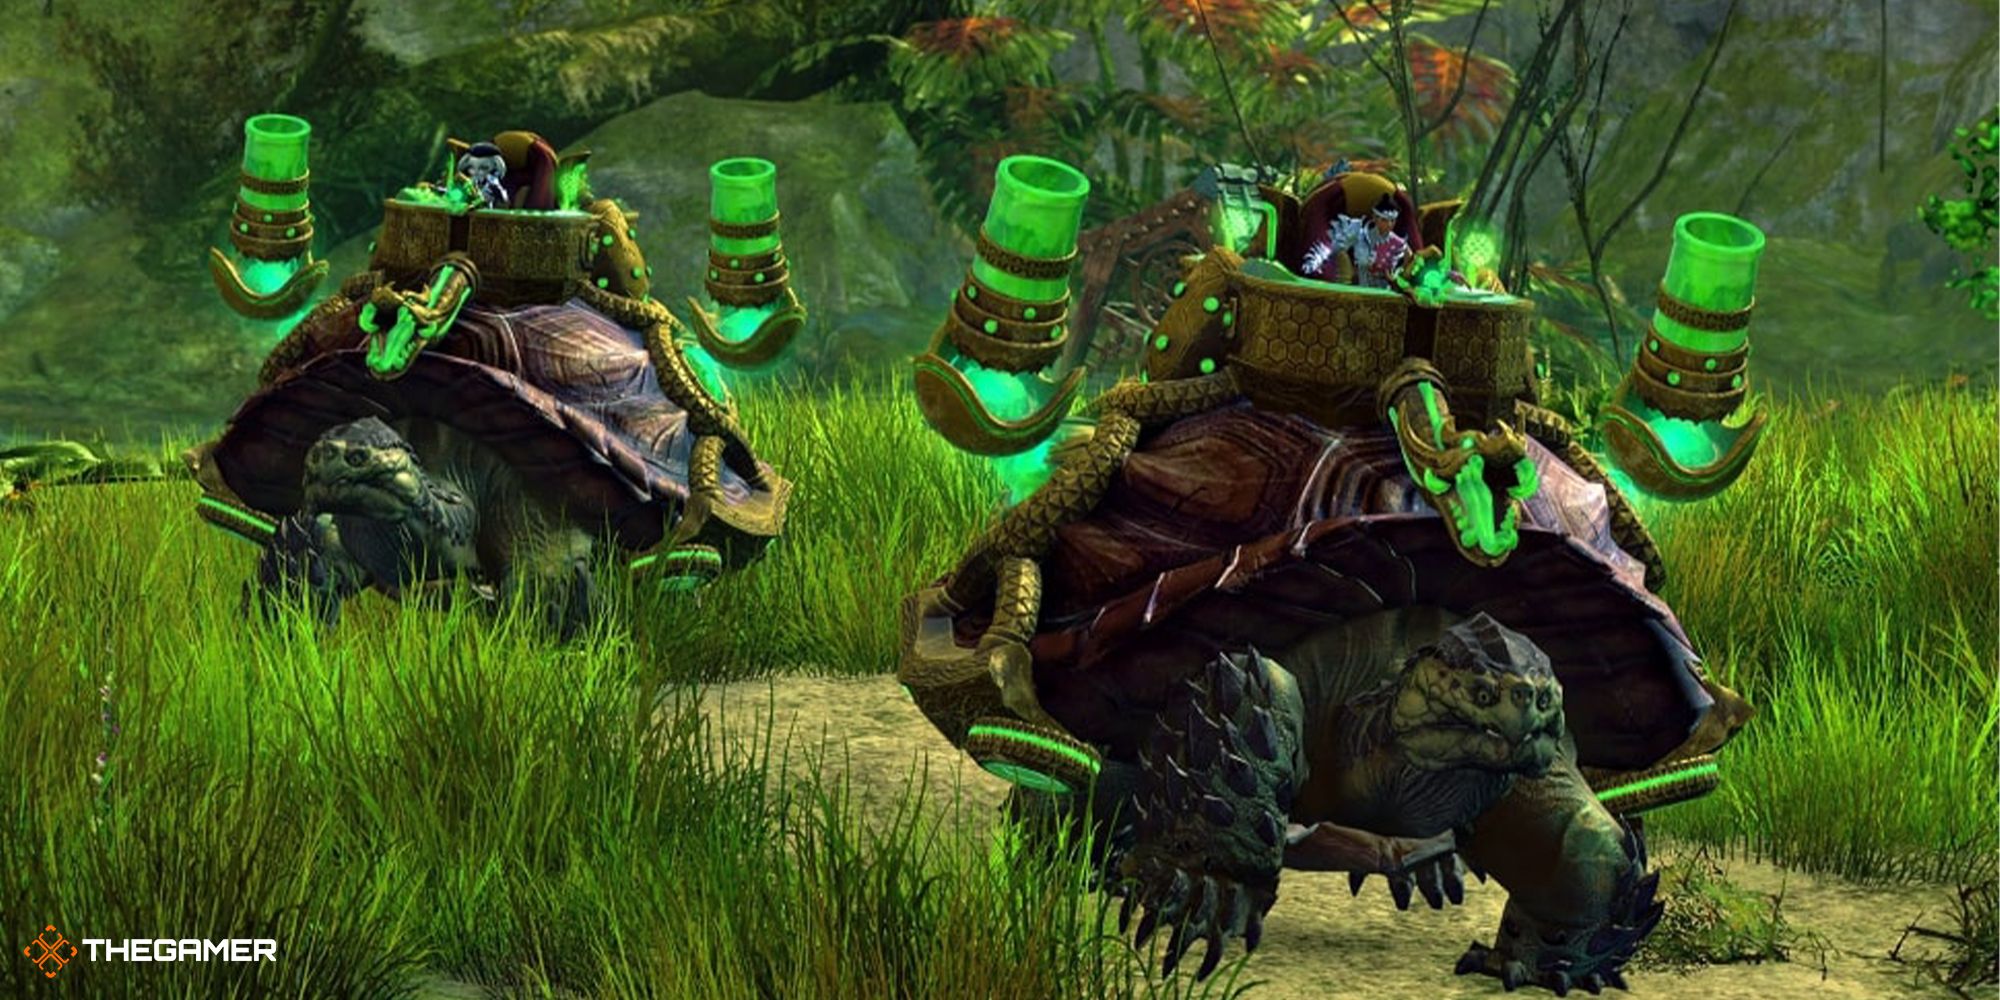 Guild Wars 2 - players riding Siege Turtles